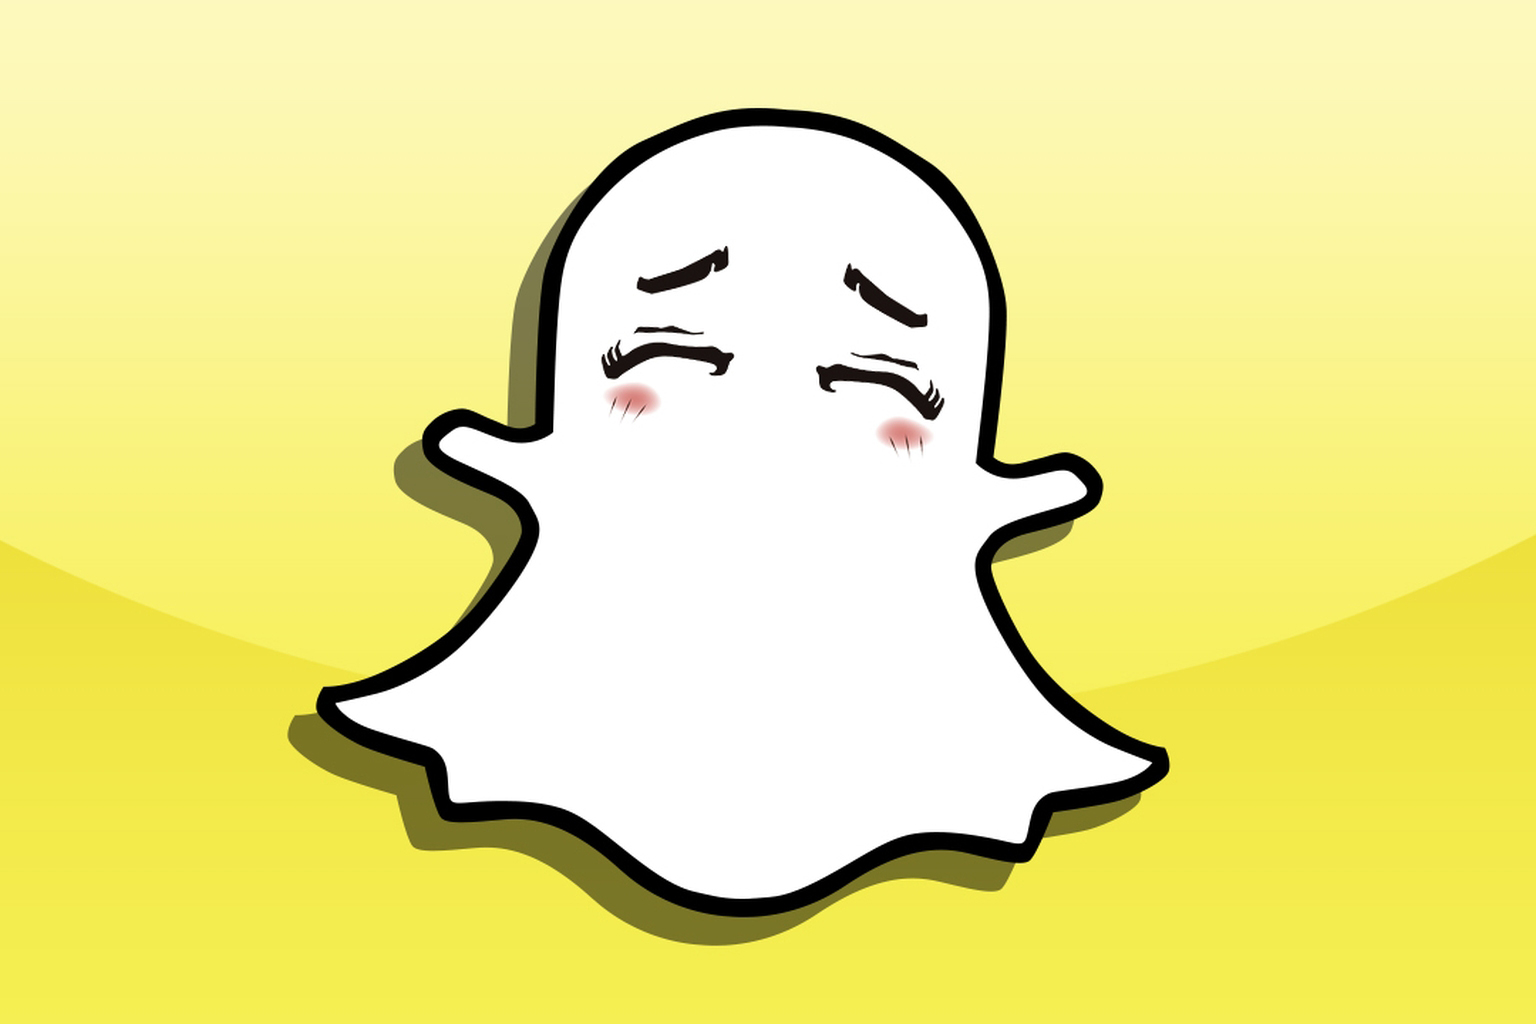 Snapchat Faces Criticism for Its 